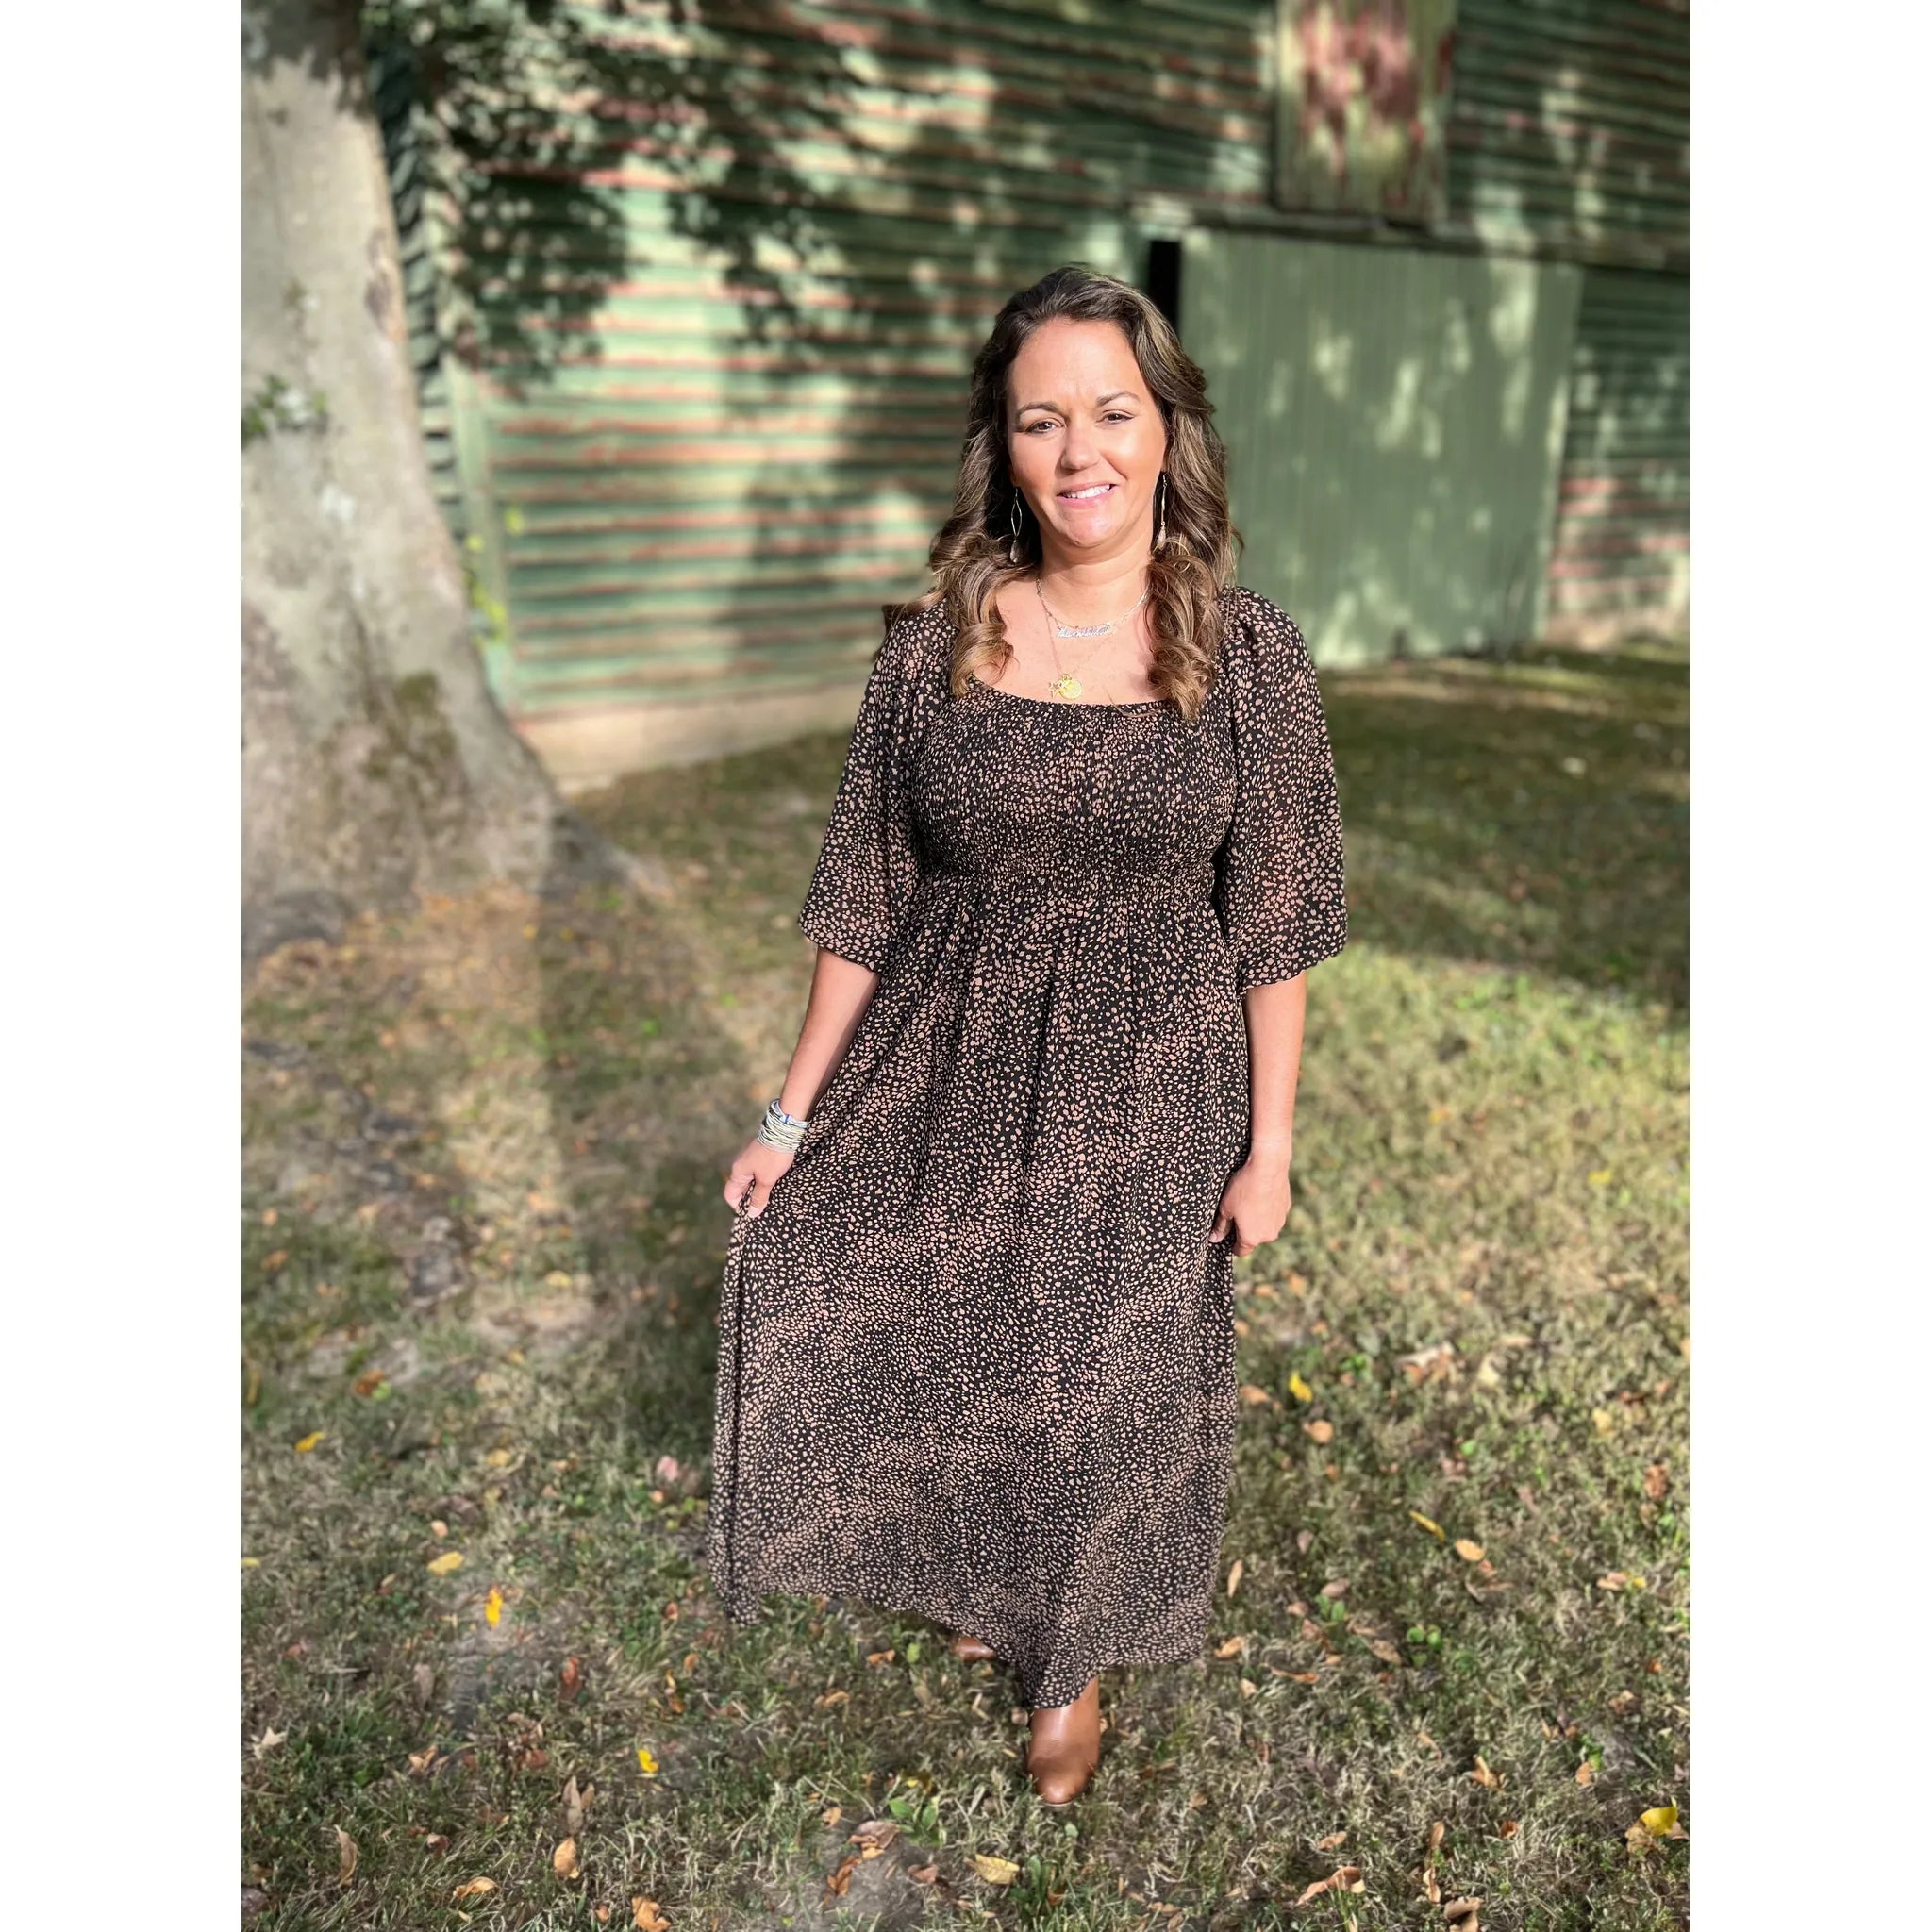 Say "hello" to the Maddie Raye Dress! This stunning maxi dress features a 2-tone shirred bodice that's sure to make a statement. It's black with a beautiful brown pattern for a look that's classic yet unique. Plus, the comfortable fit will have you looking and feeling like royalty!  Olivia is wearing a size small.